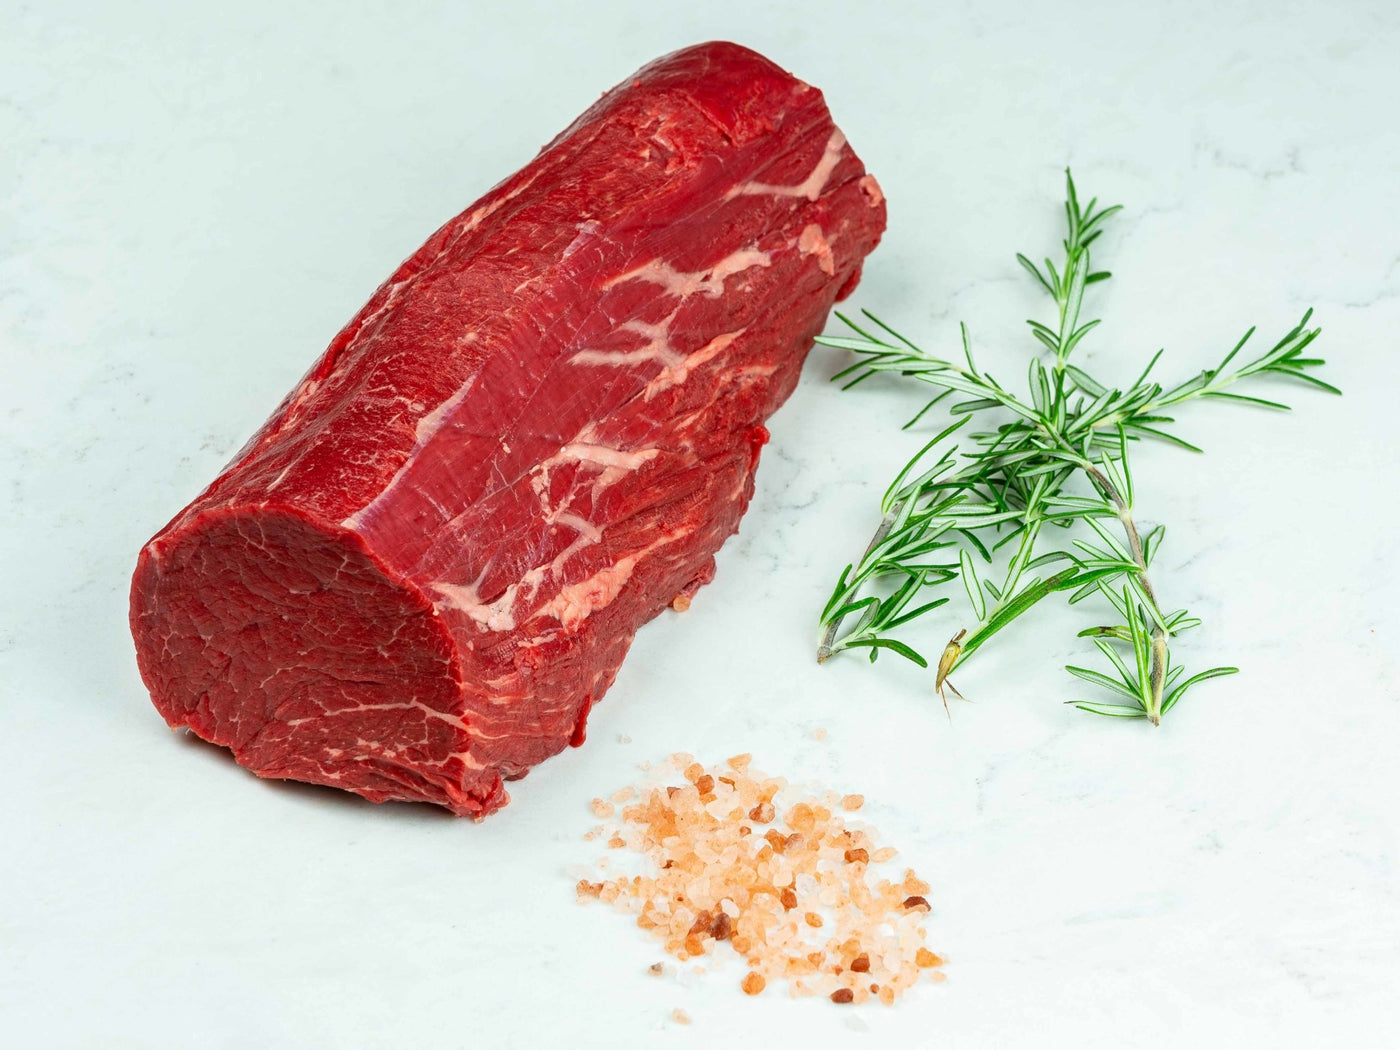 Grass Fed, Dry-Aged Fillet - Centre Cut - Thomas Joseph Butchery - Ethical Dry-Aged Meat The Best Steak UK Thomas Joseph Butchery